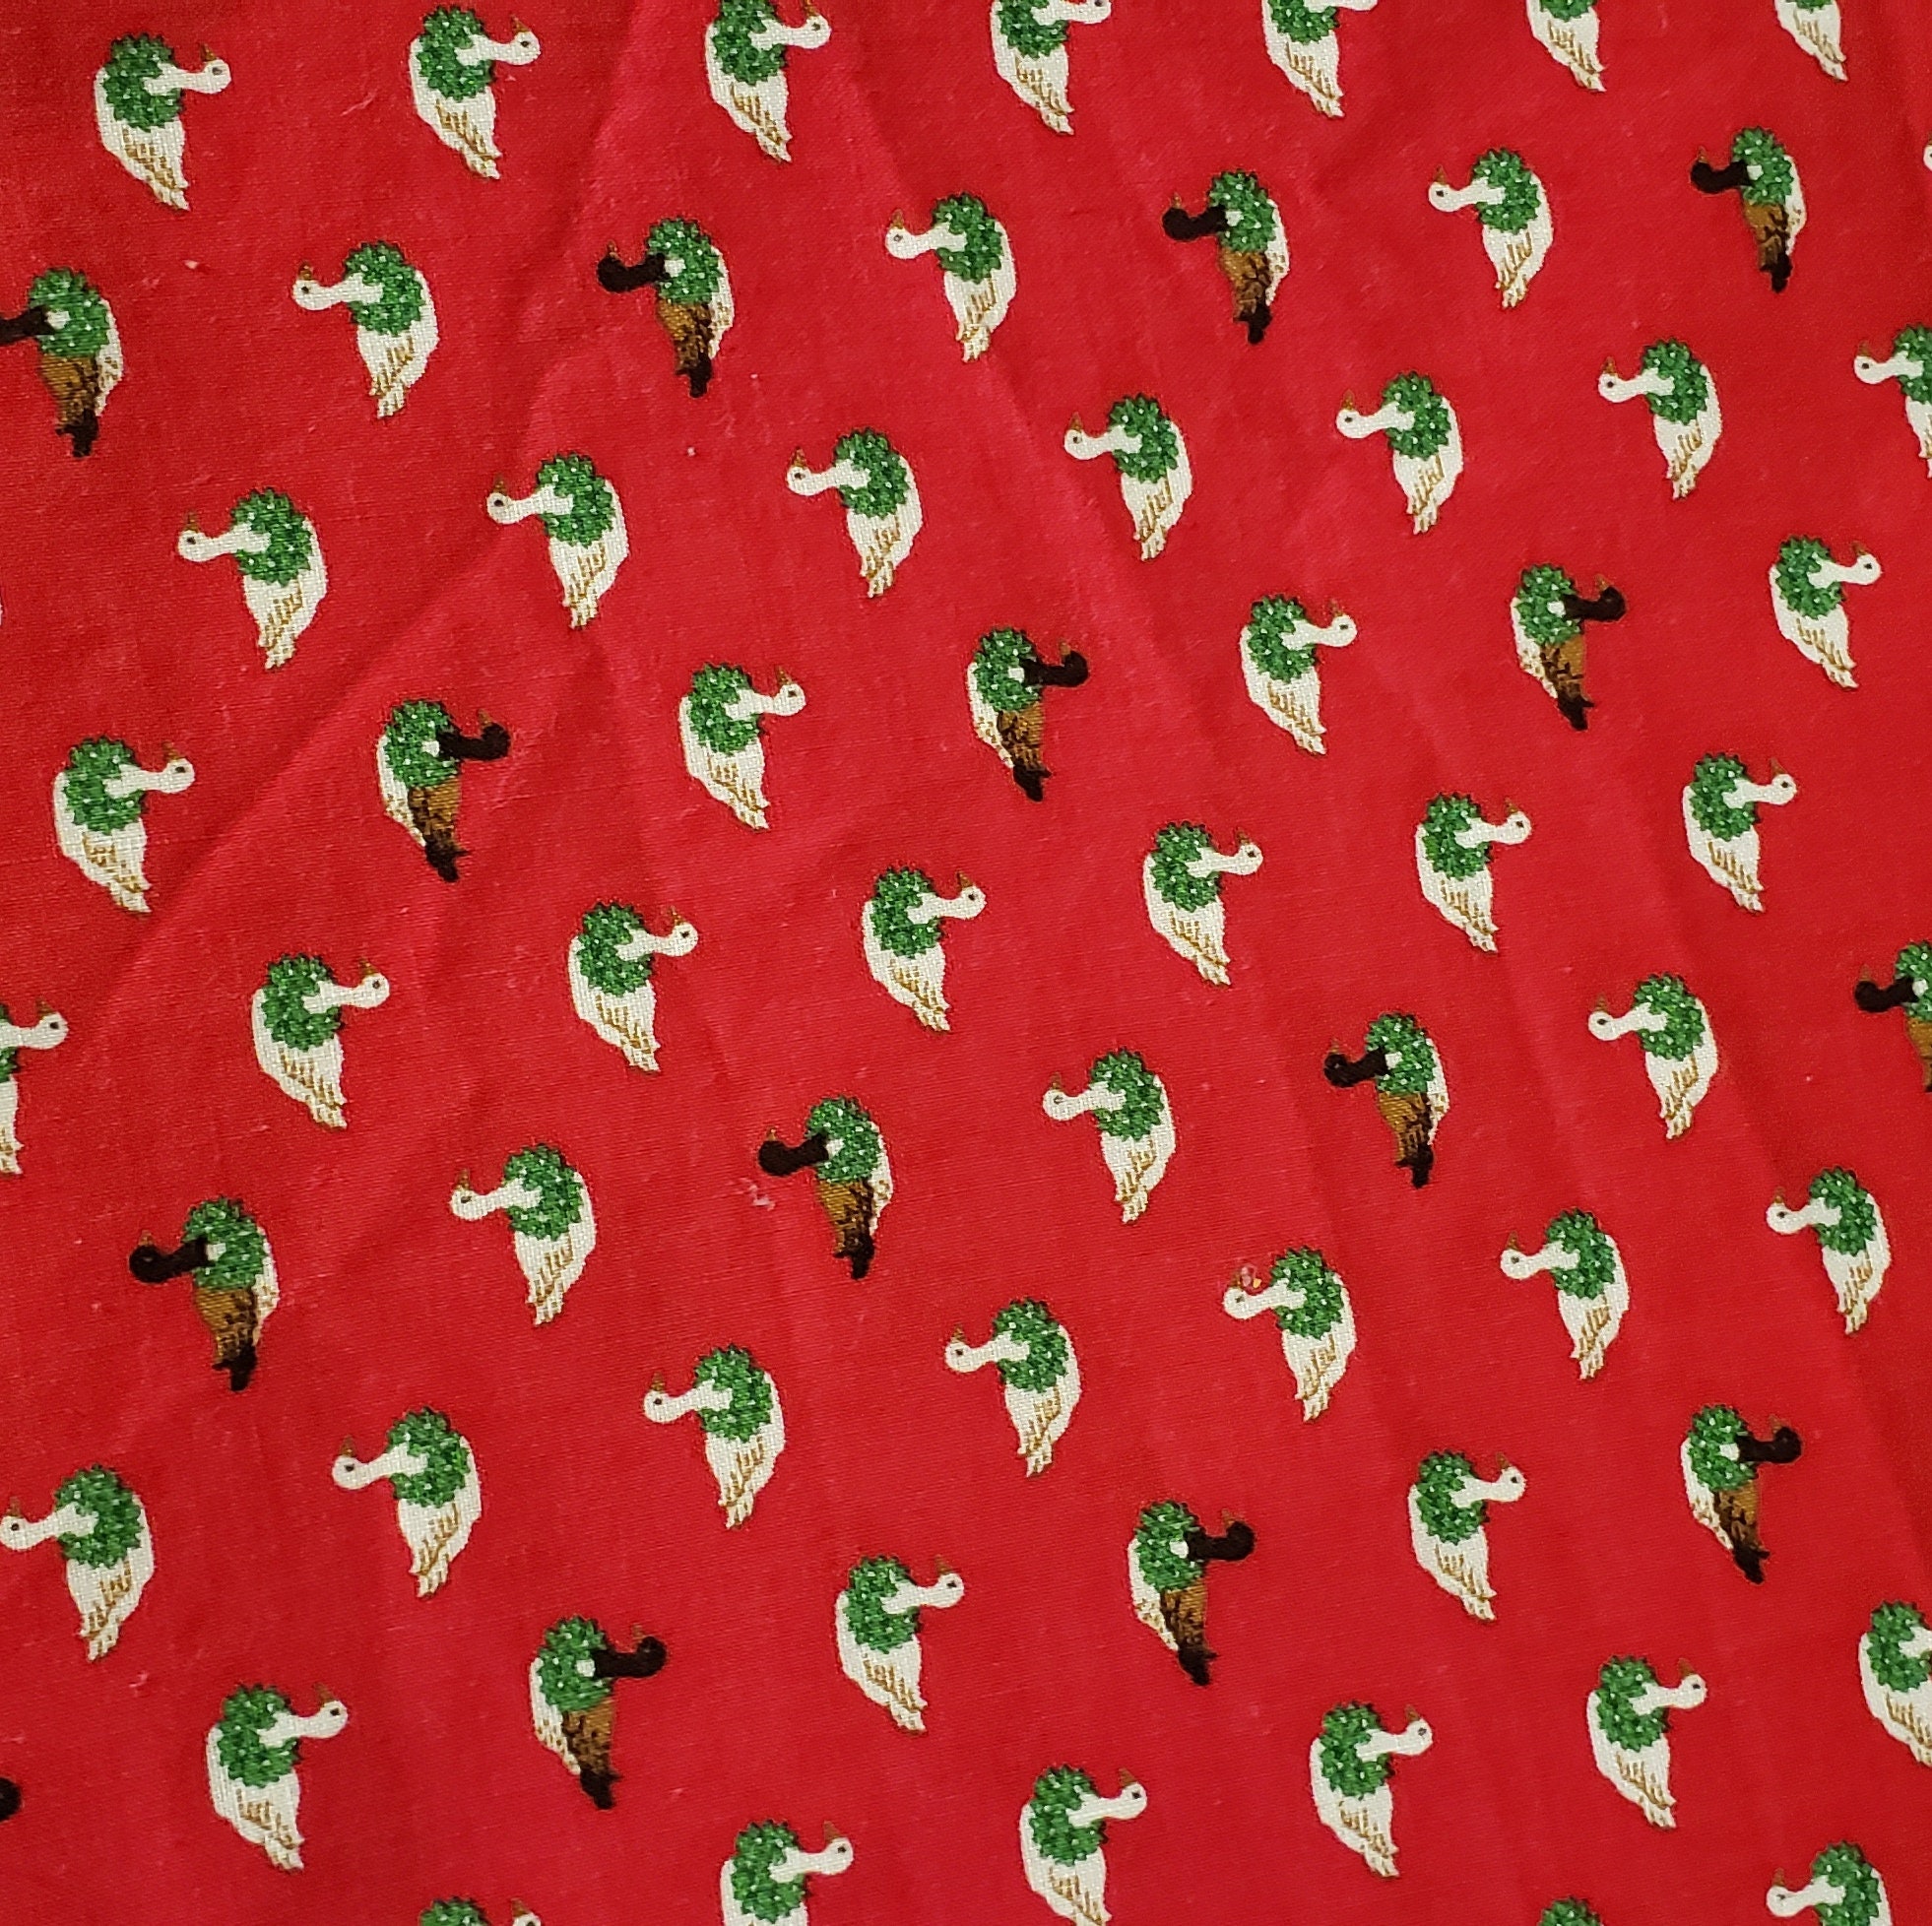 Cotton fabric remnants Christmas prints quilt fabric craft | Etsy